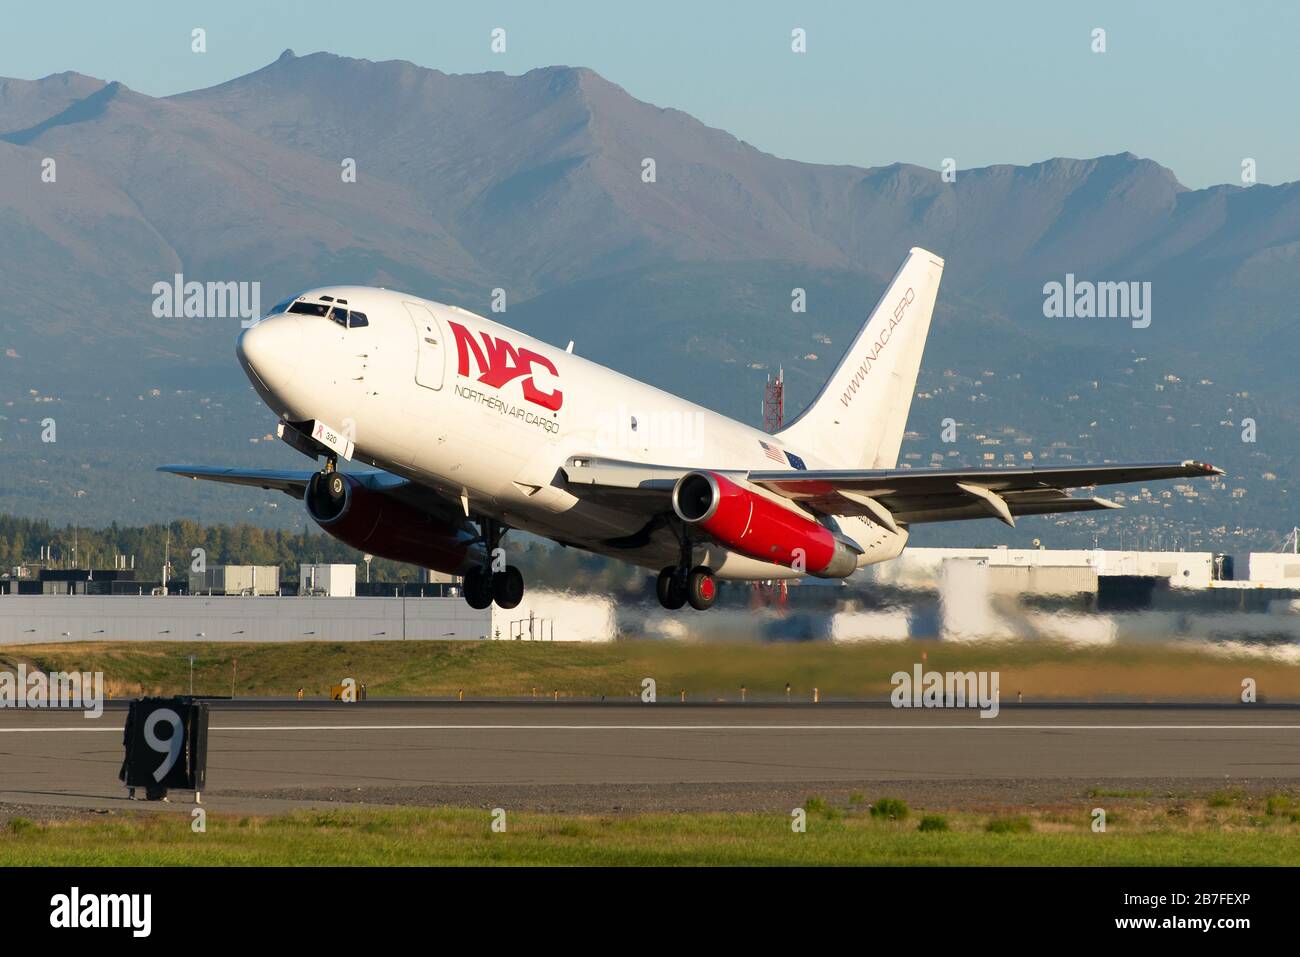 Northern Air Cargo Boeing 737 Cargo departing Anchorage Airport in Alaska. 737-200F aircraft, a classic freighter airplane. Registered as N320DL. Stock Photo